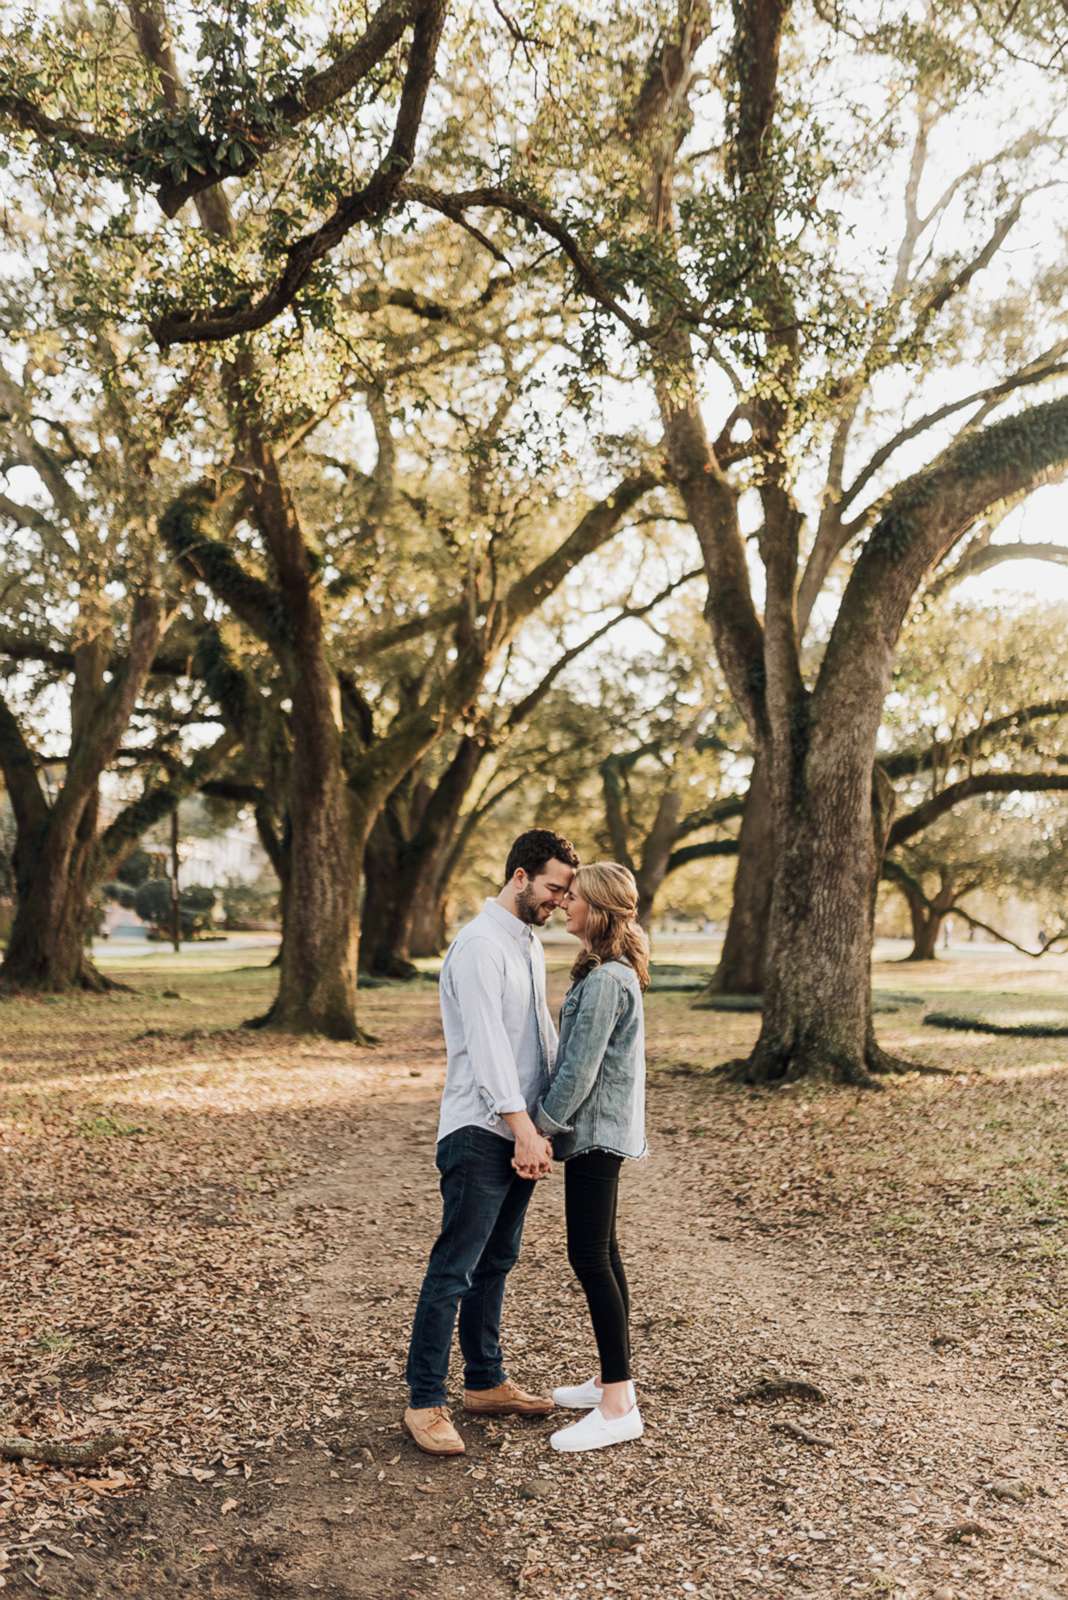 PHOTO: Katherine Salisbury and James Matthews posed in an engagement shoot at Audubon Park in New Orleans.